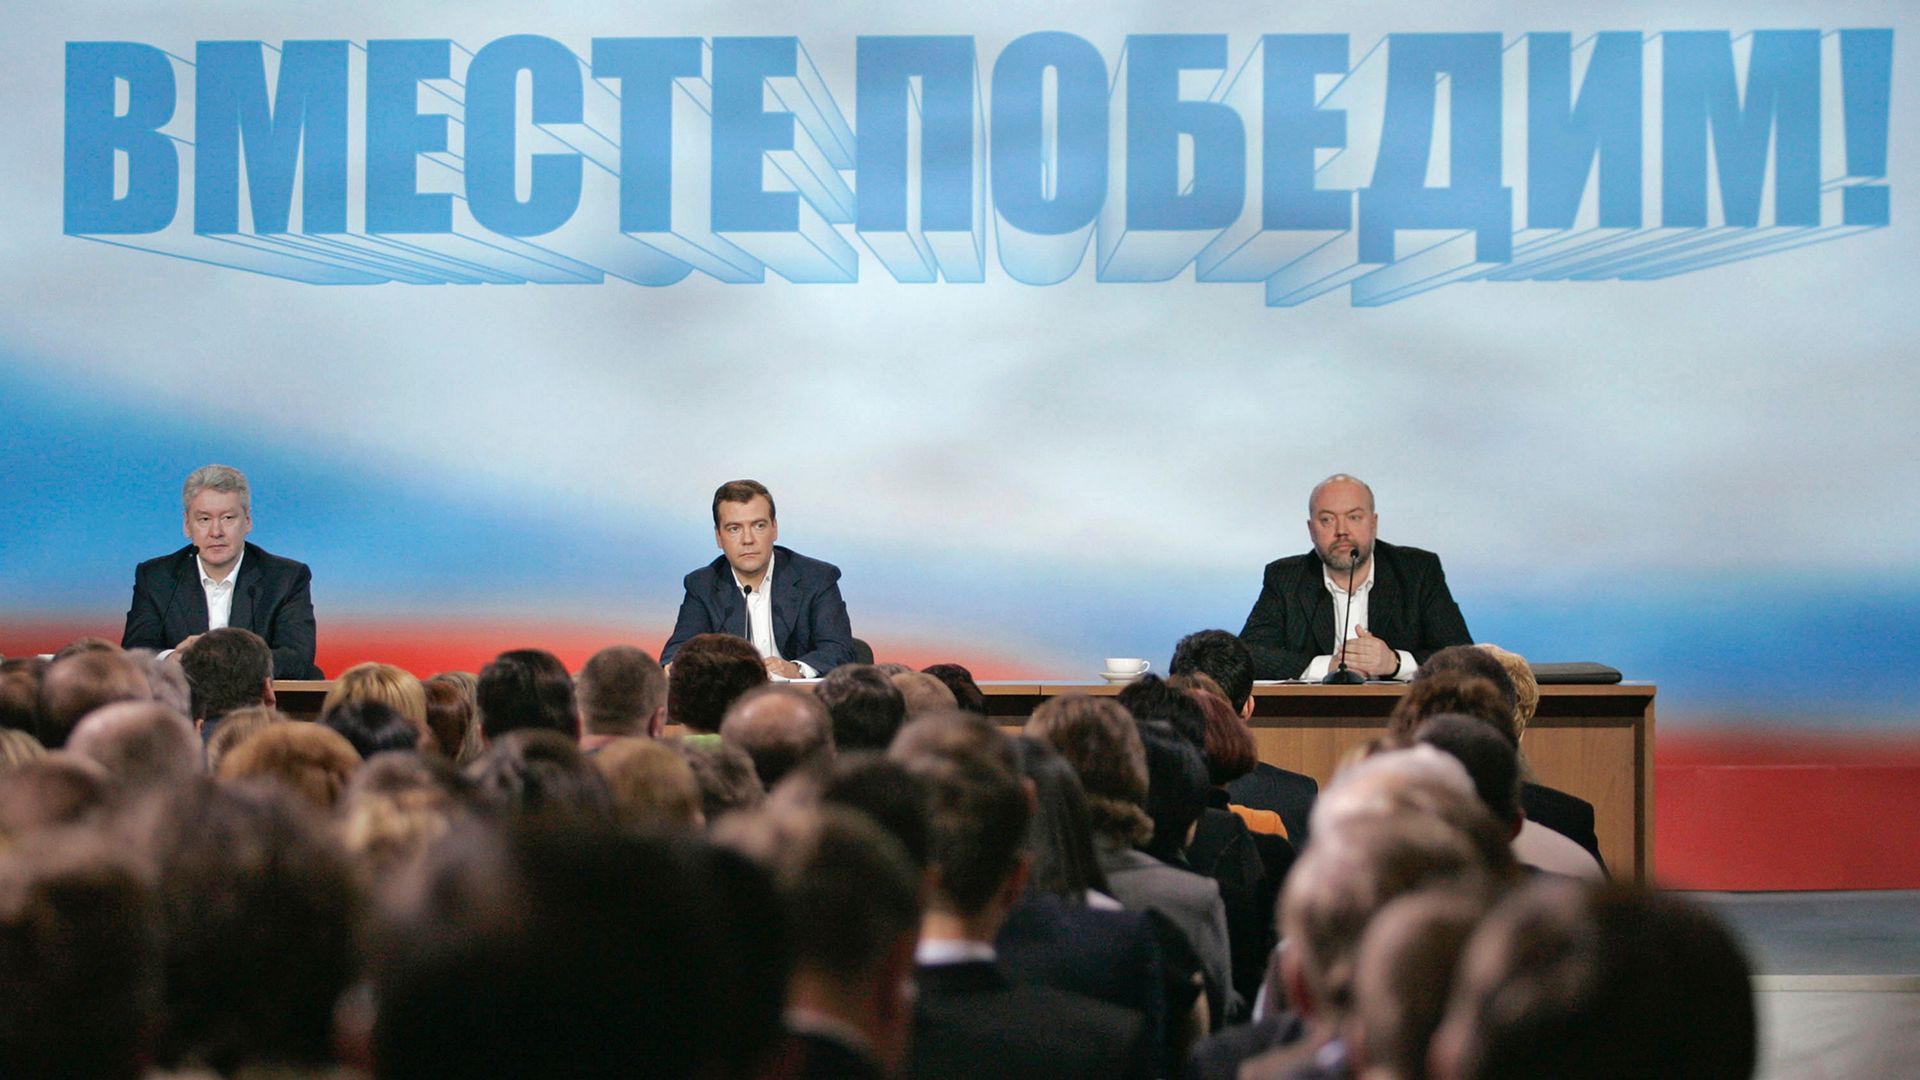 The pre-election campaign of Dmitry Medvedev started in autumn 2007